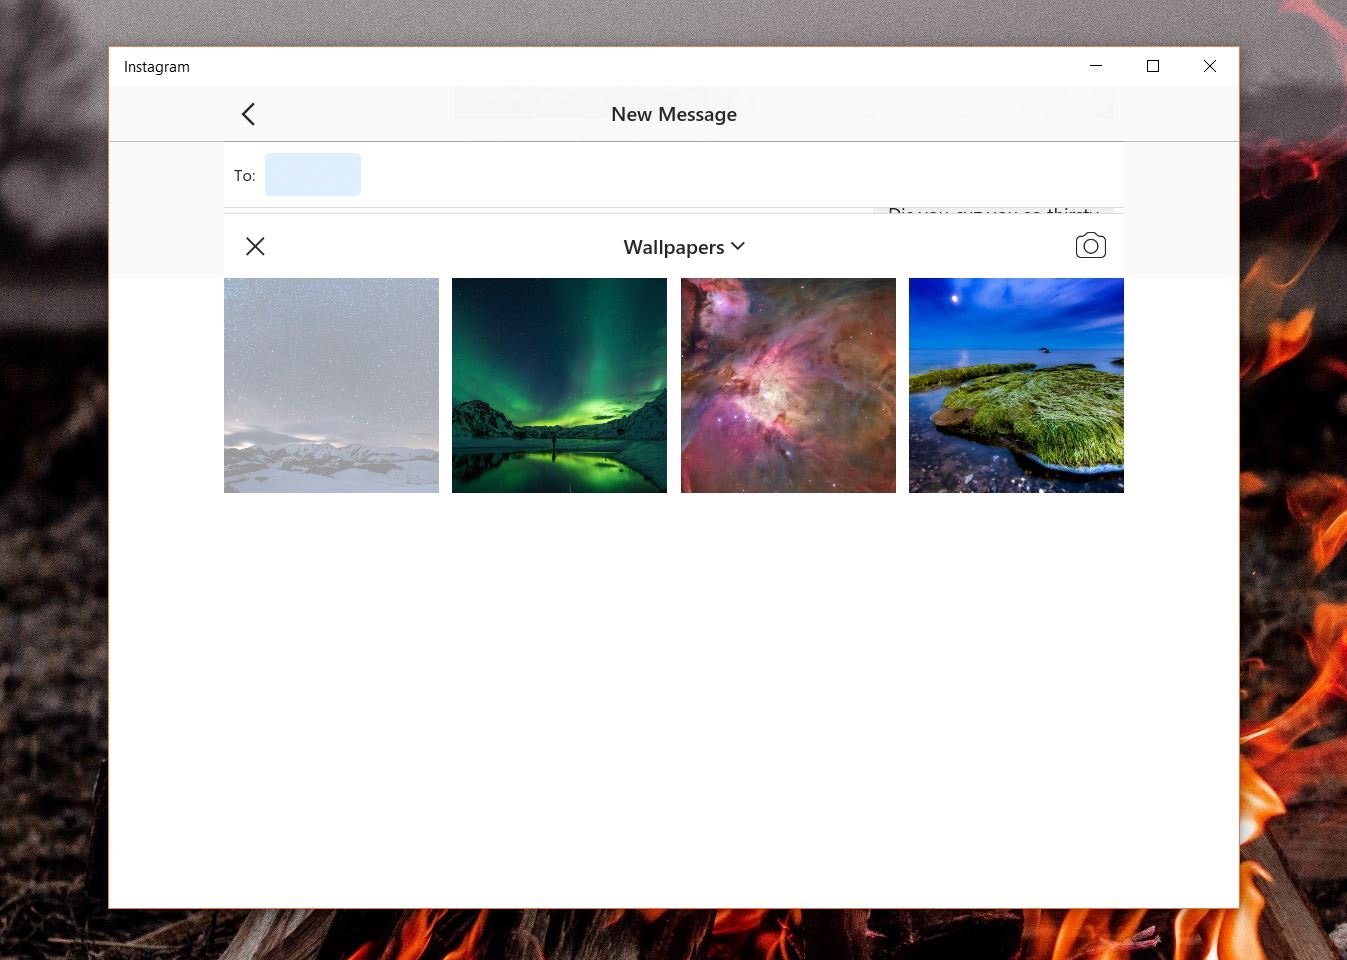 Instagram now lets you send photos and videos via DM on your Windows 10 PC